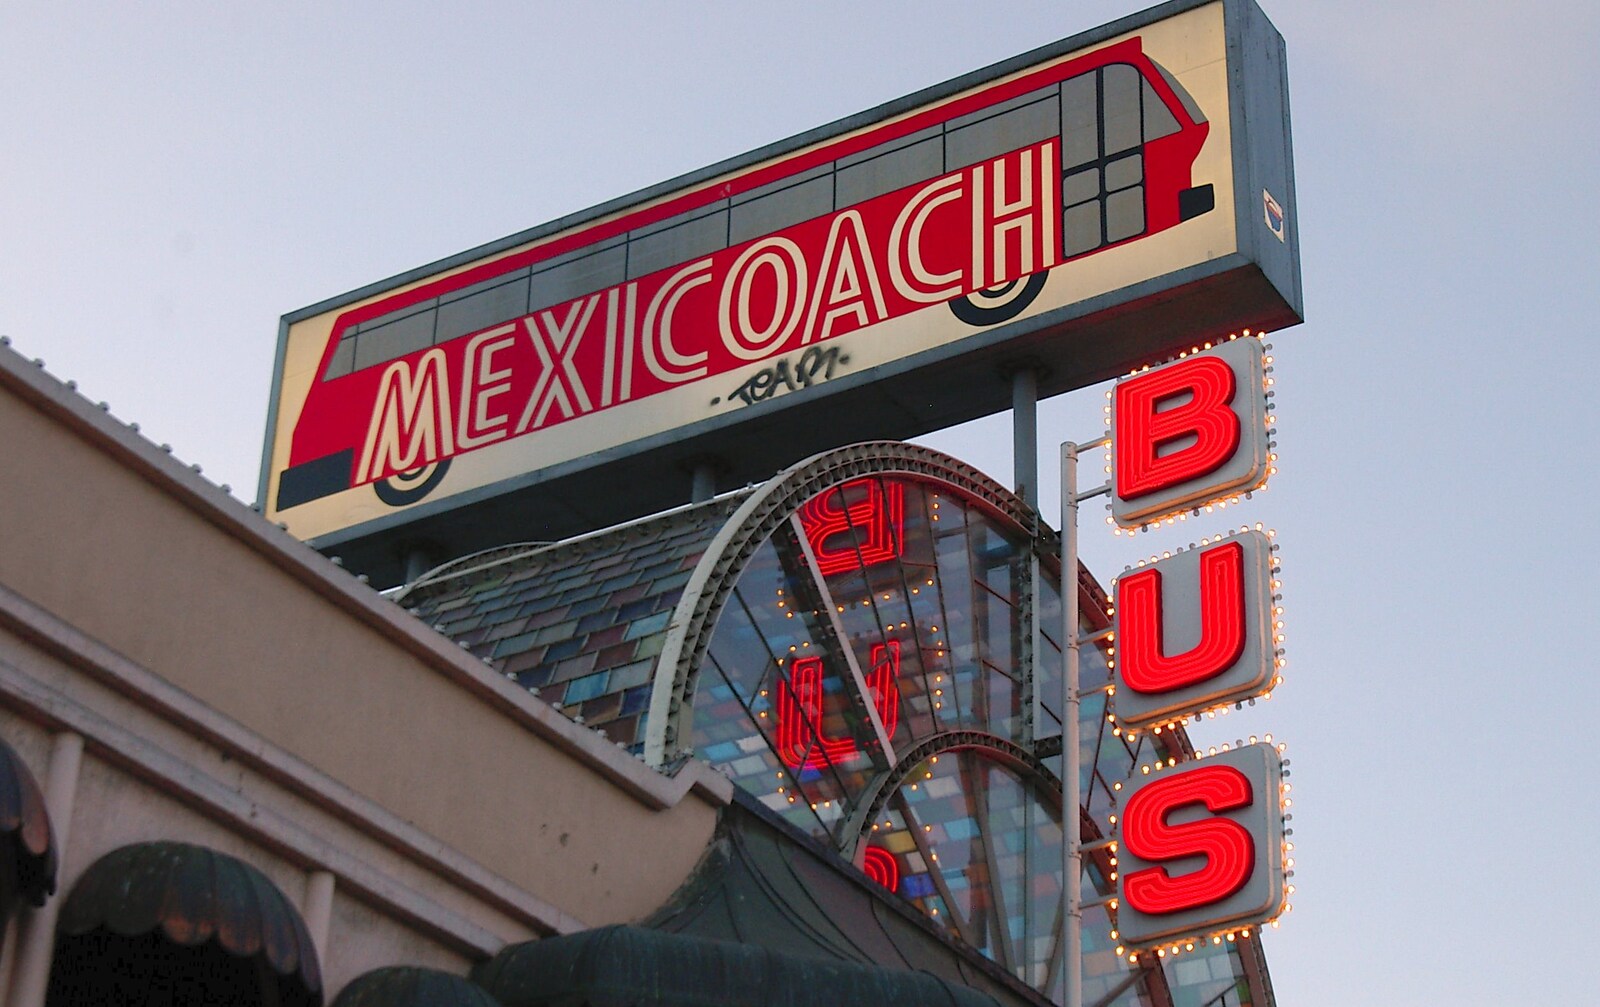 The neon sign of the central bus station from A Trip to Tijuana, Mexico - 25th March 2006